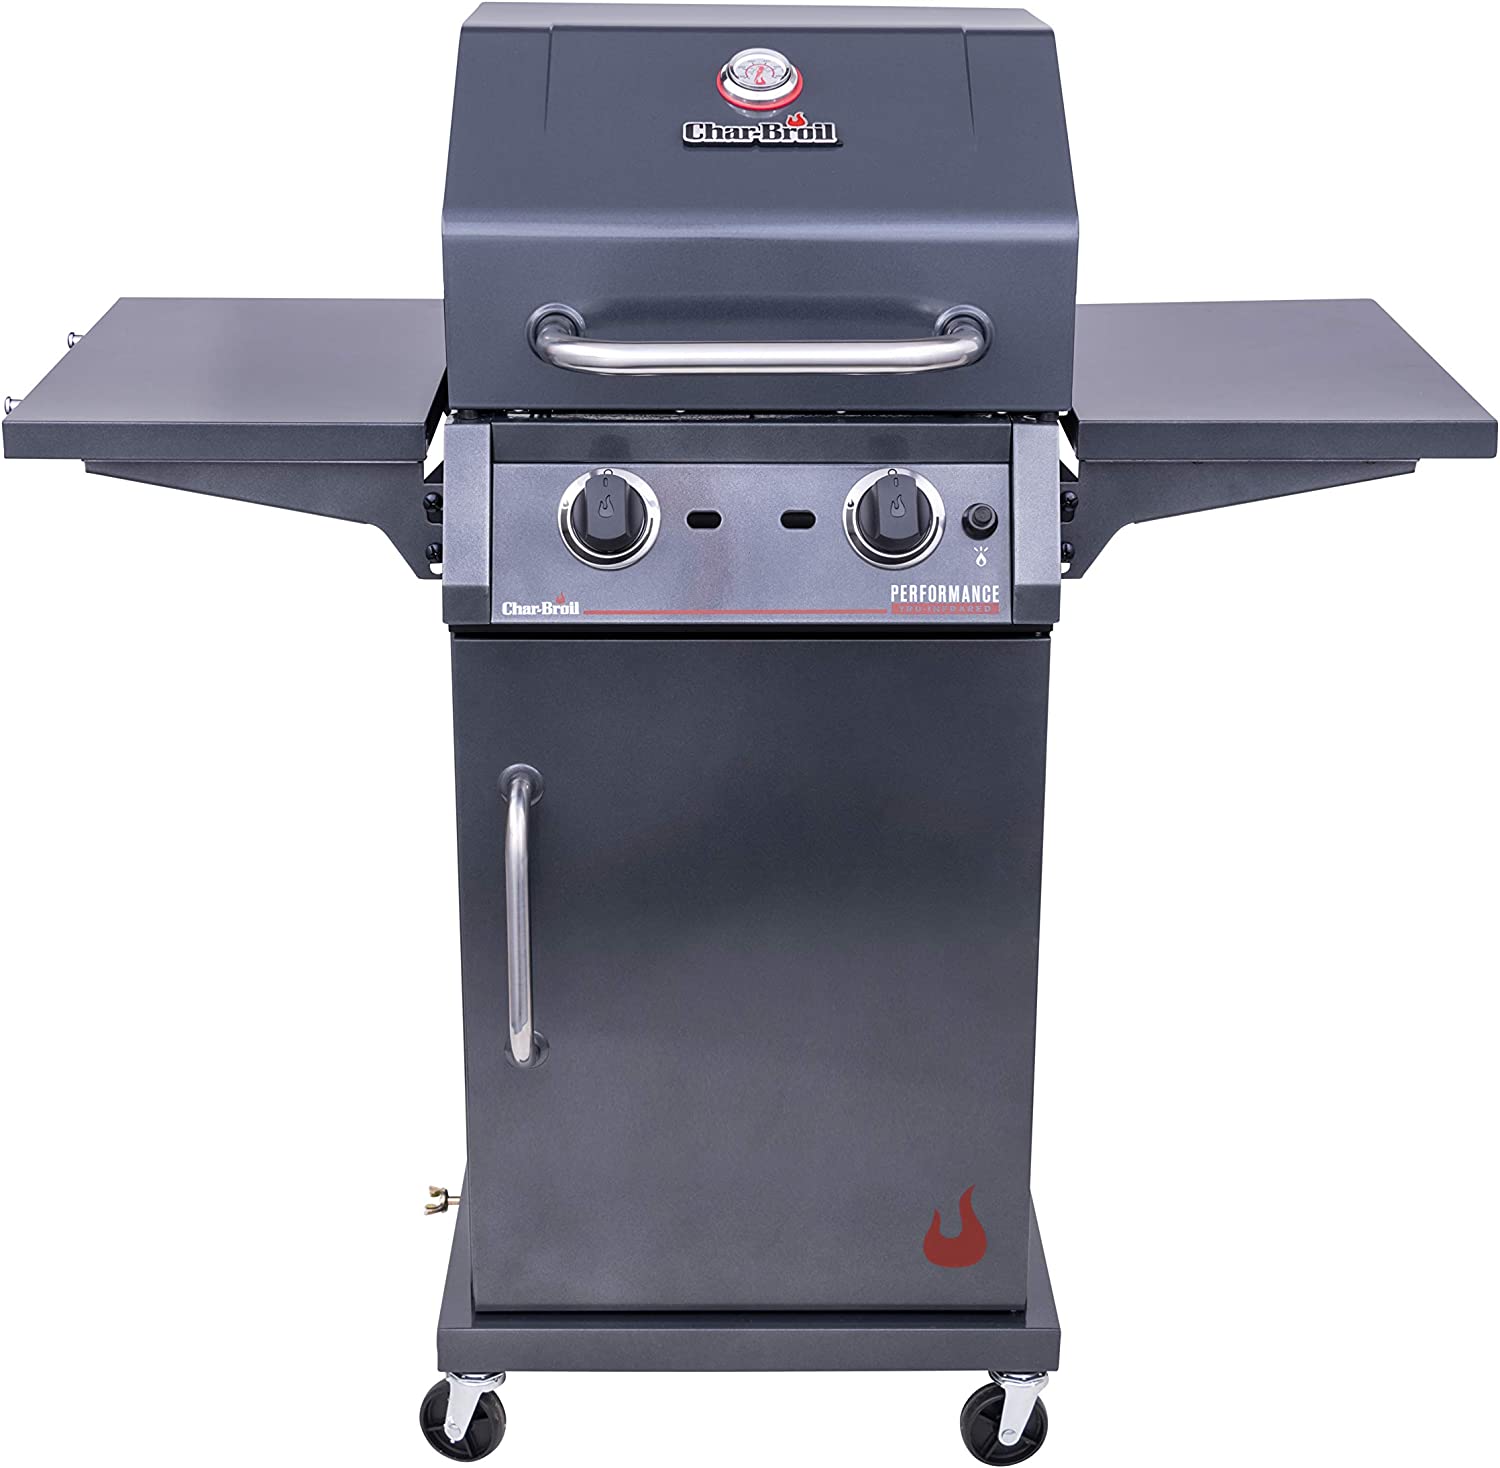 Char-Broil-Performance-Series-4-Burner-Gas-Grill Affordable Grills: Grill Like a Pro for Less